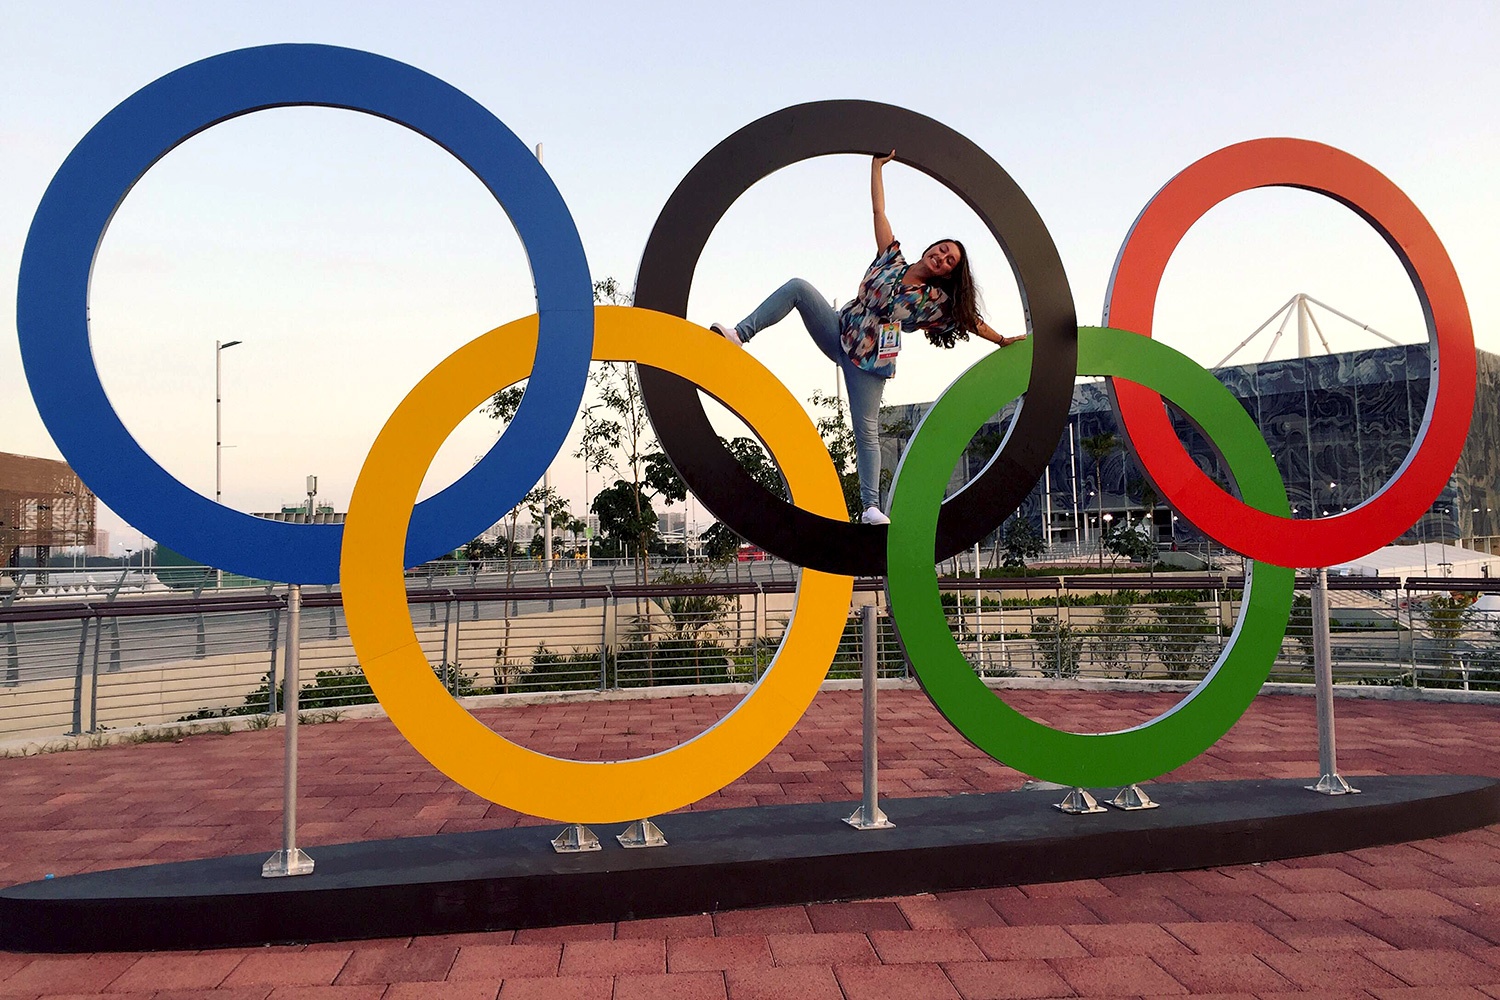 Alexandra D’Elia poses with the Olympic rings in Rio de Janeiro